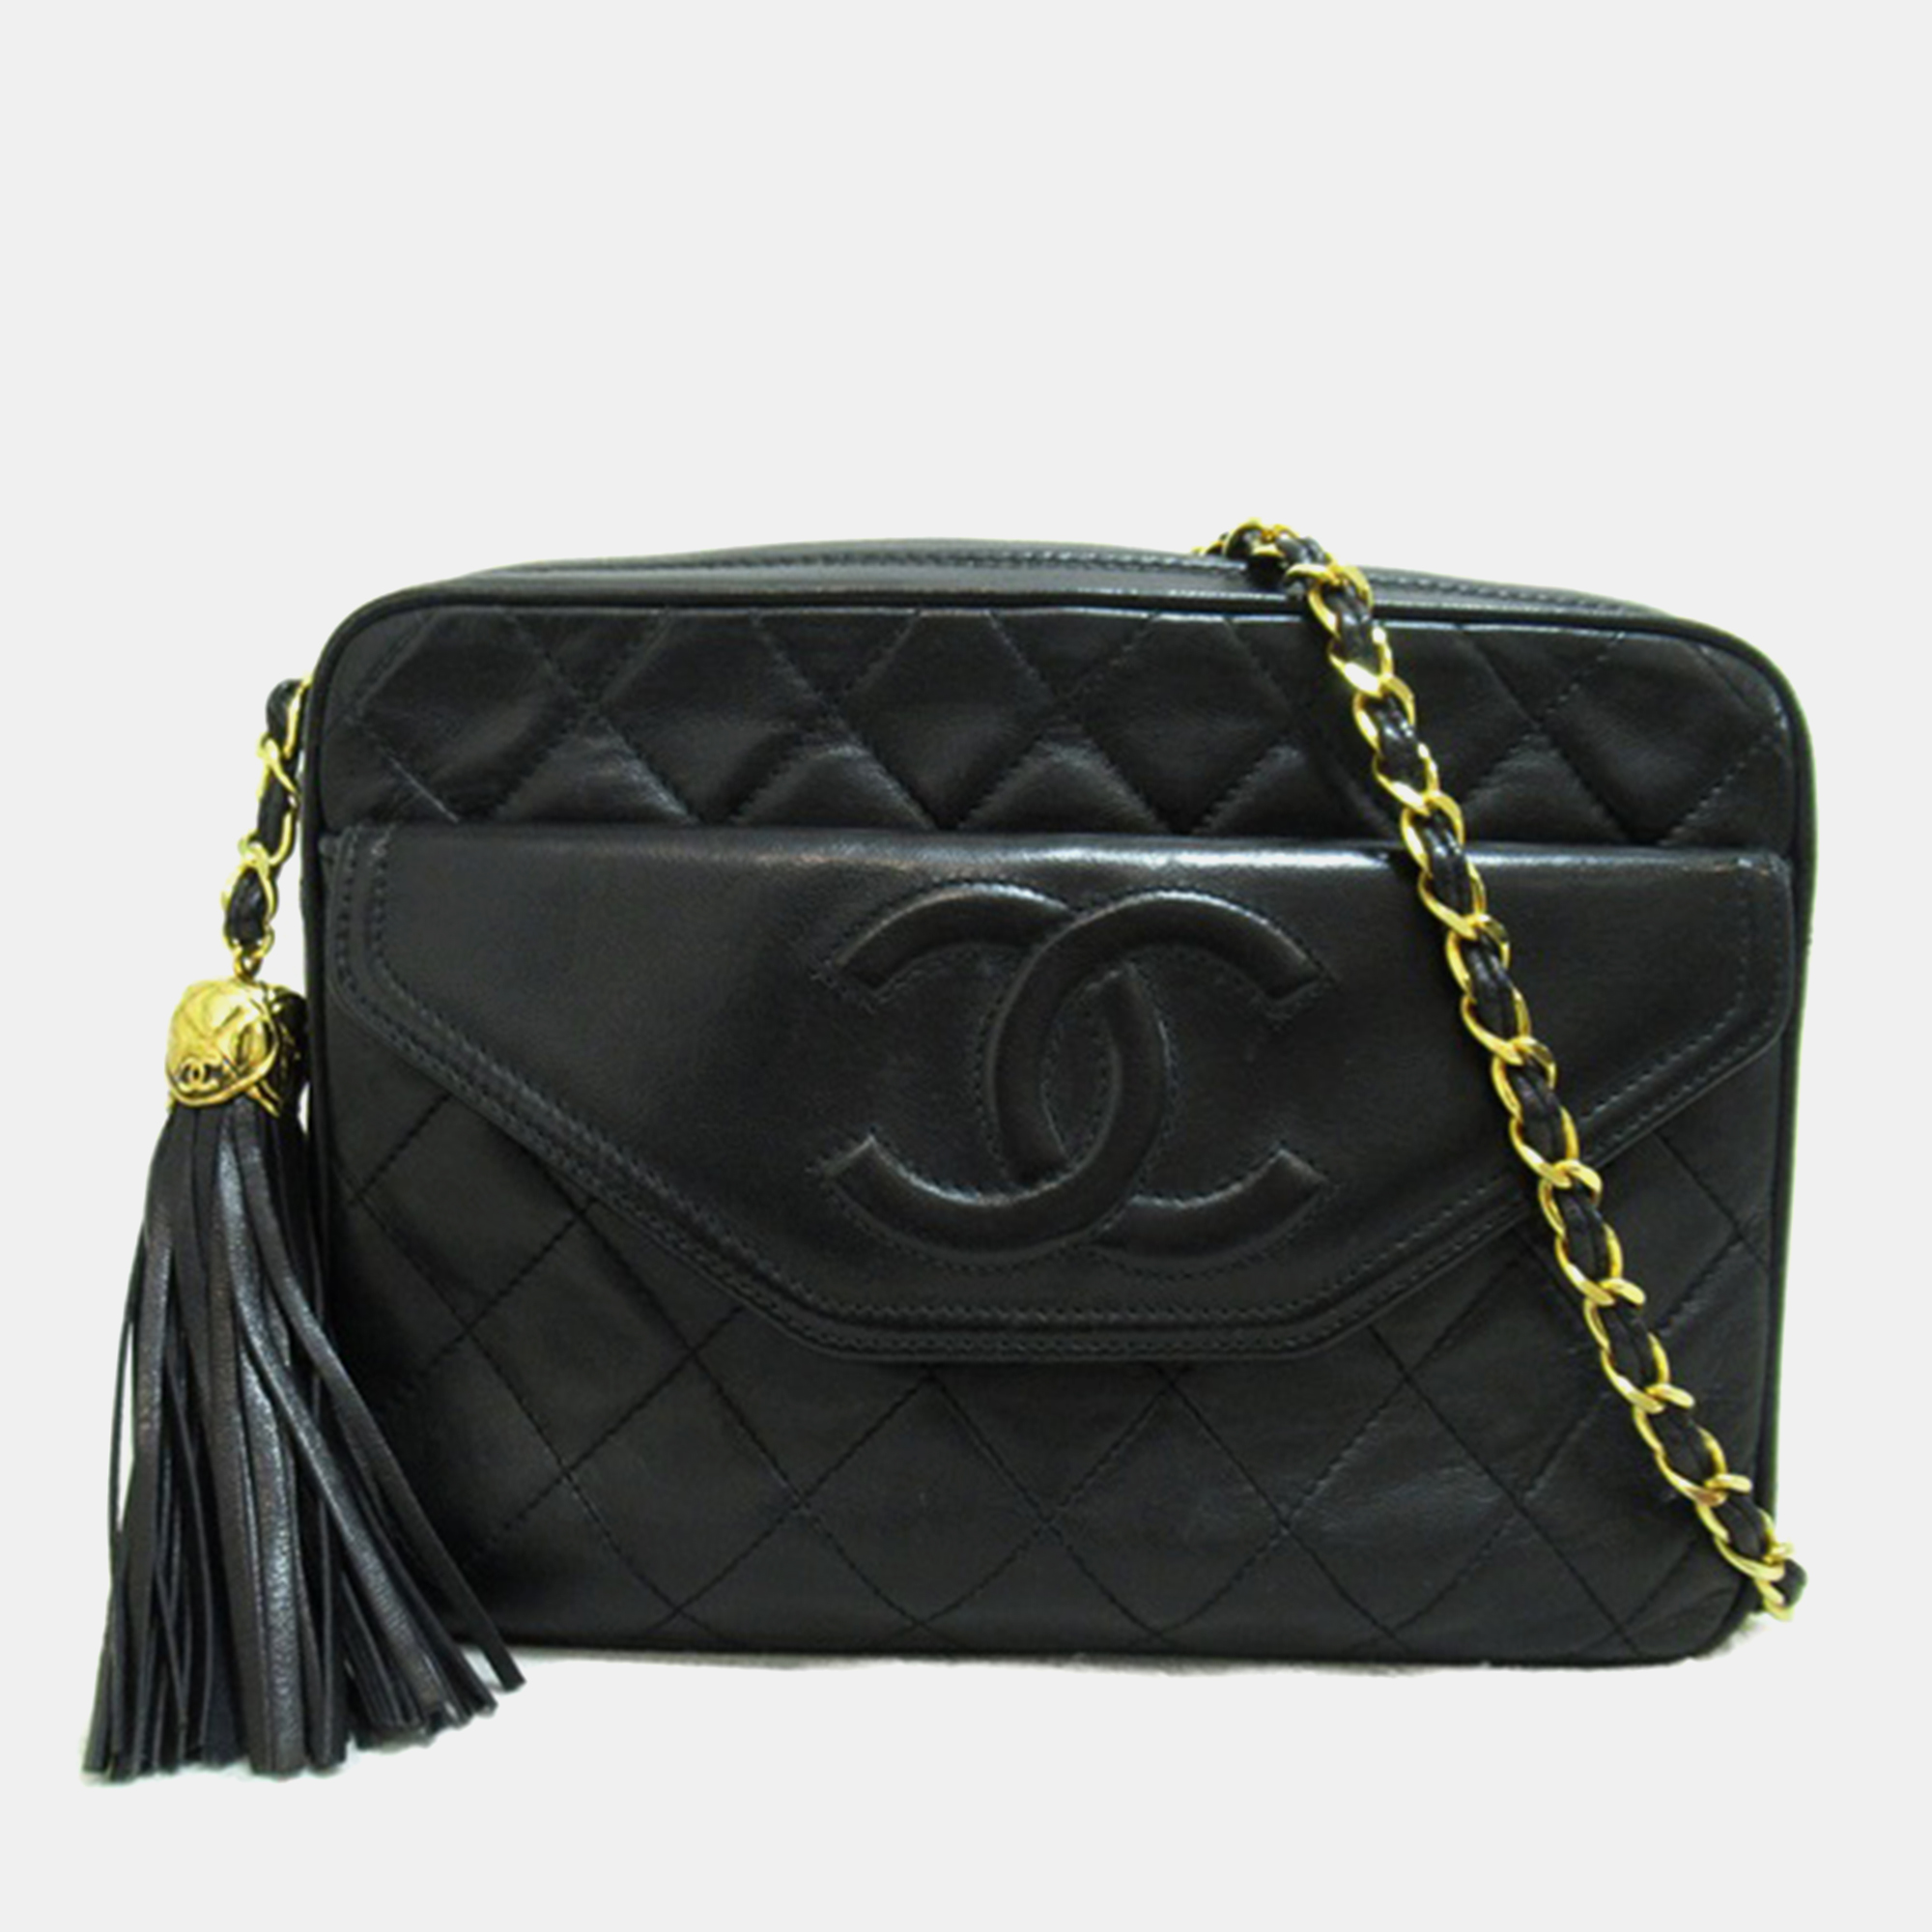 Pre-owned Chanel Black Leather Quilted Cc Camera Bag